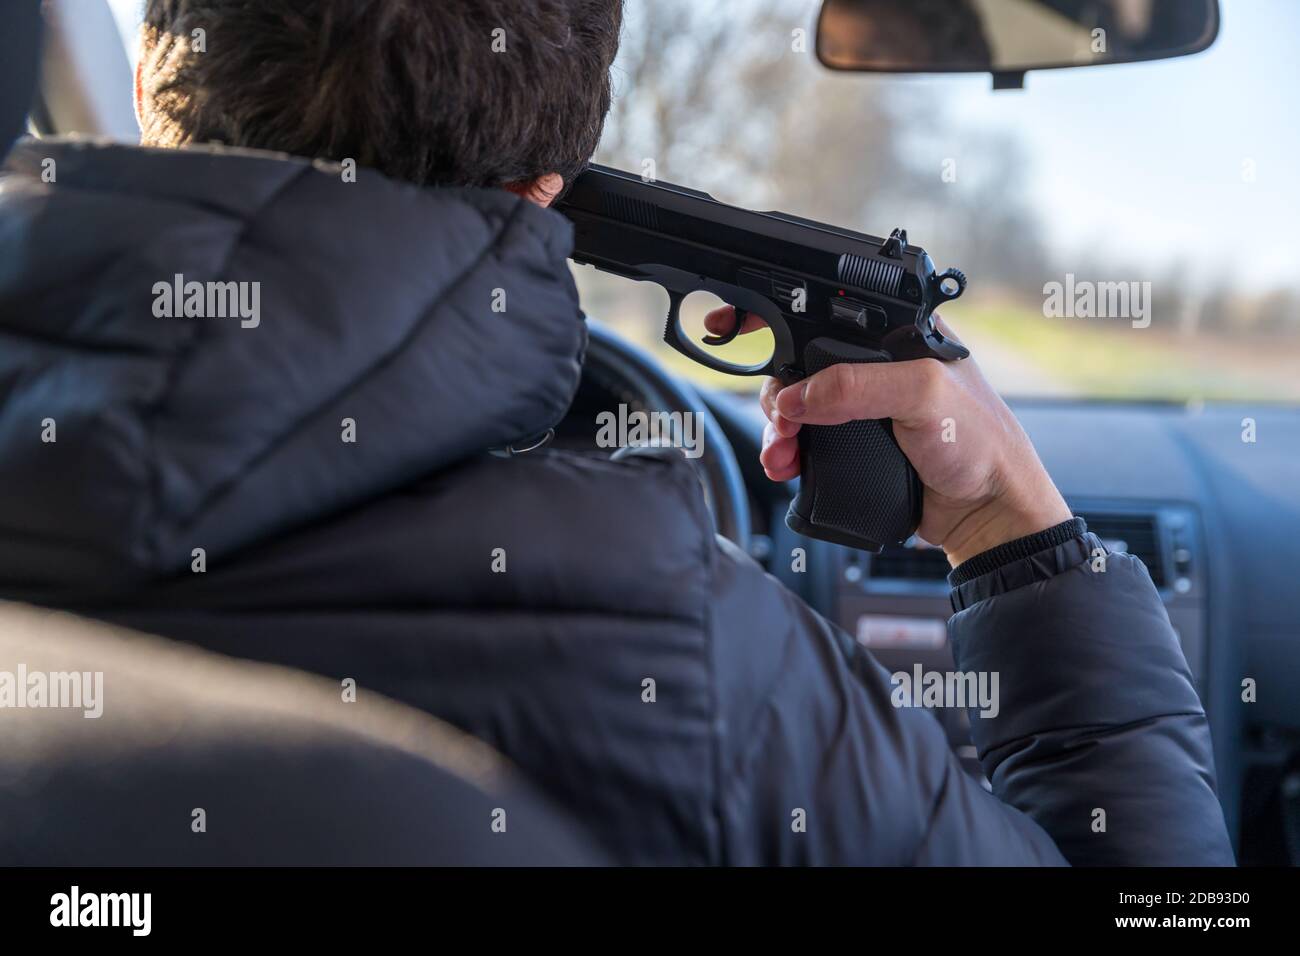 a man aiming a gun at his own head playing Russian roulette or killing himself. Stock Photo